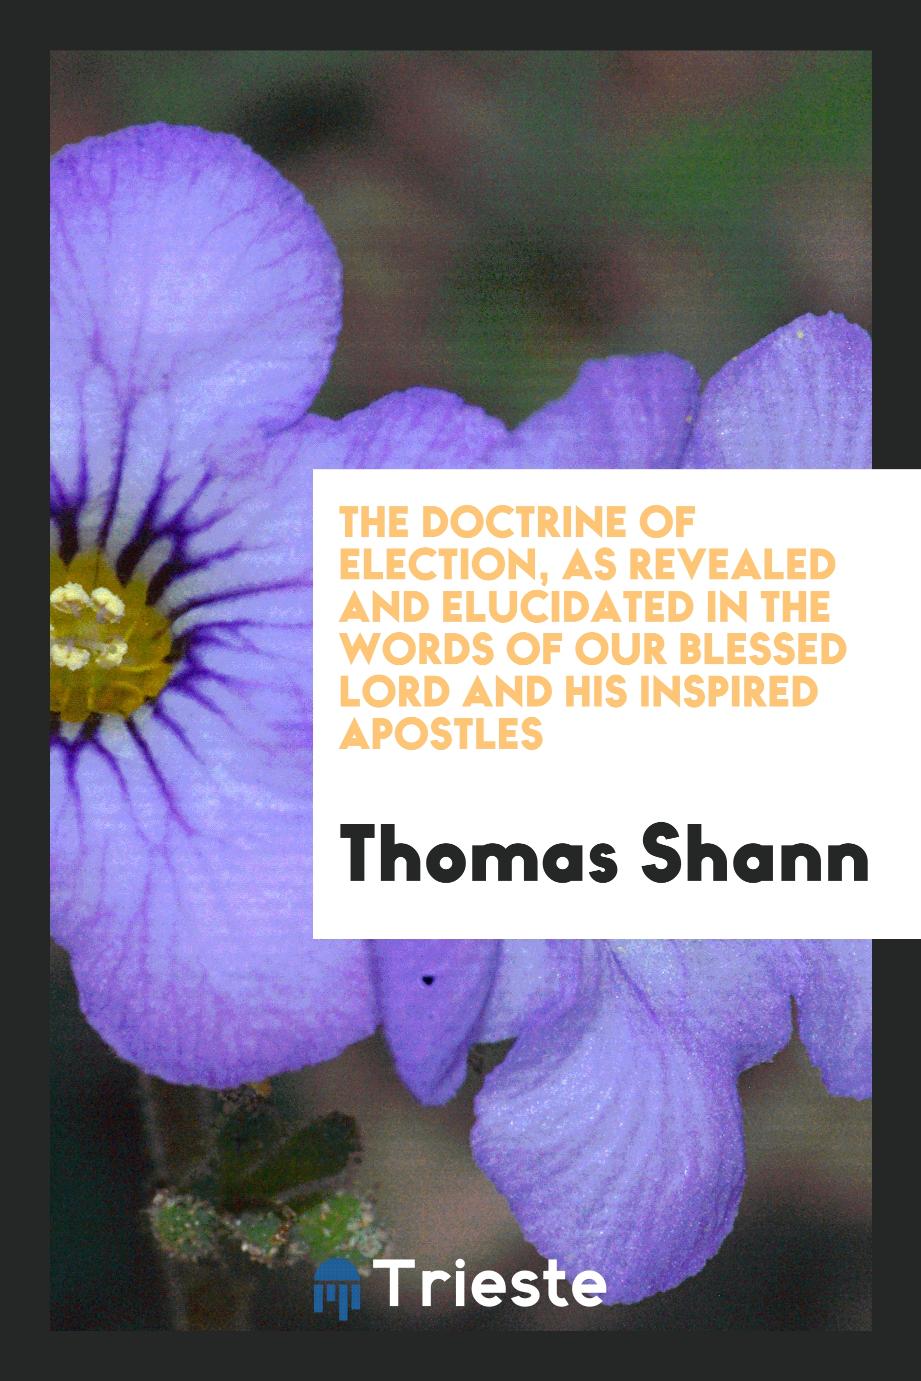 Thomas Shann - The Doctrine of Election, as Revealed and Elucidated in the Words of Our Blessed Lord and His Inspired Apostles